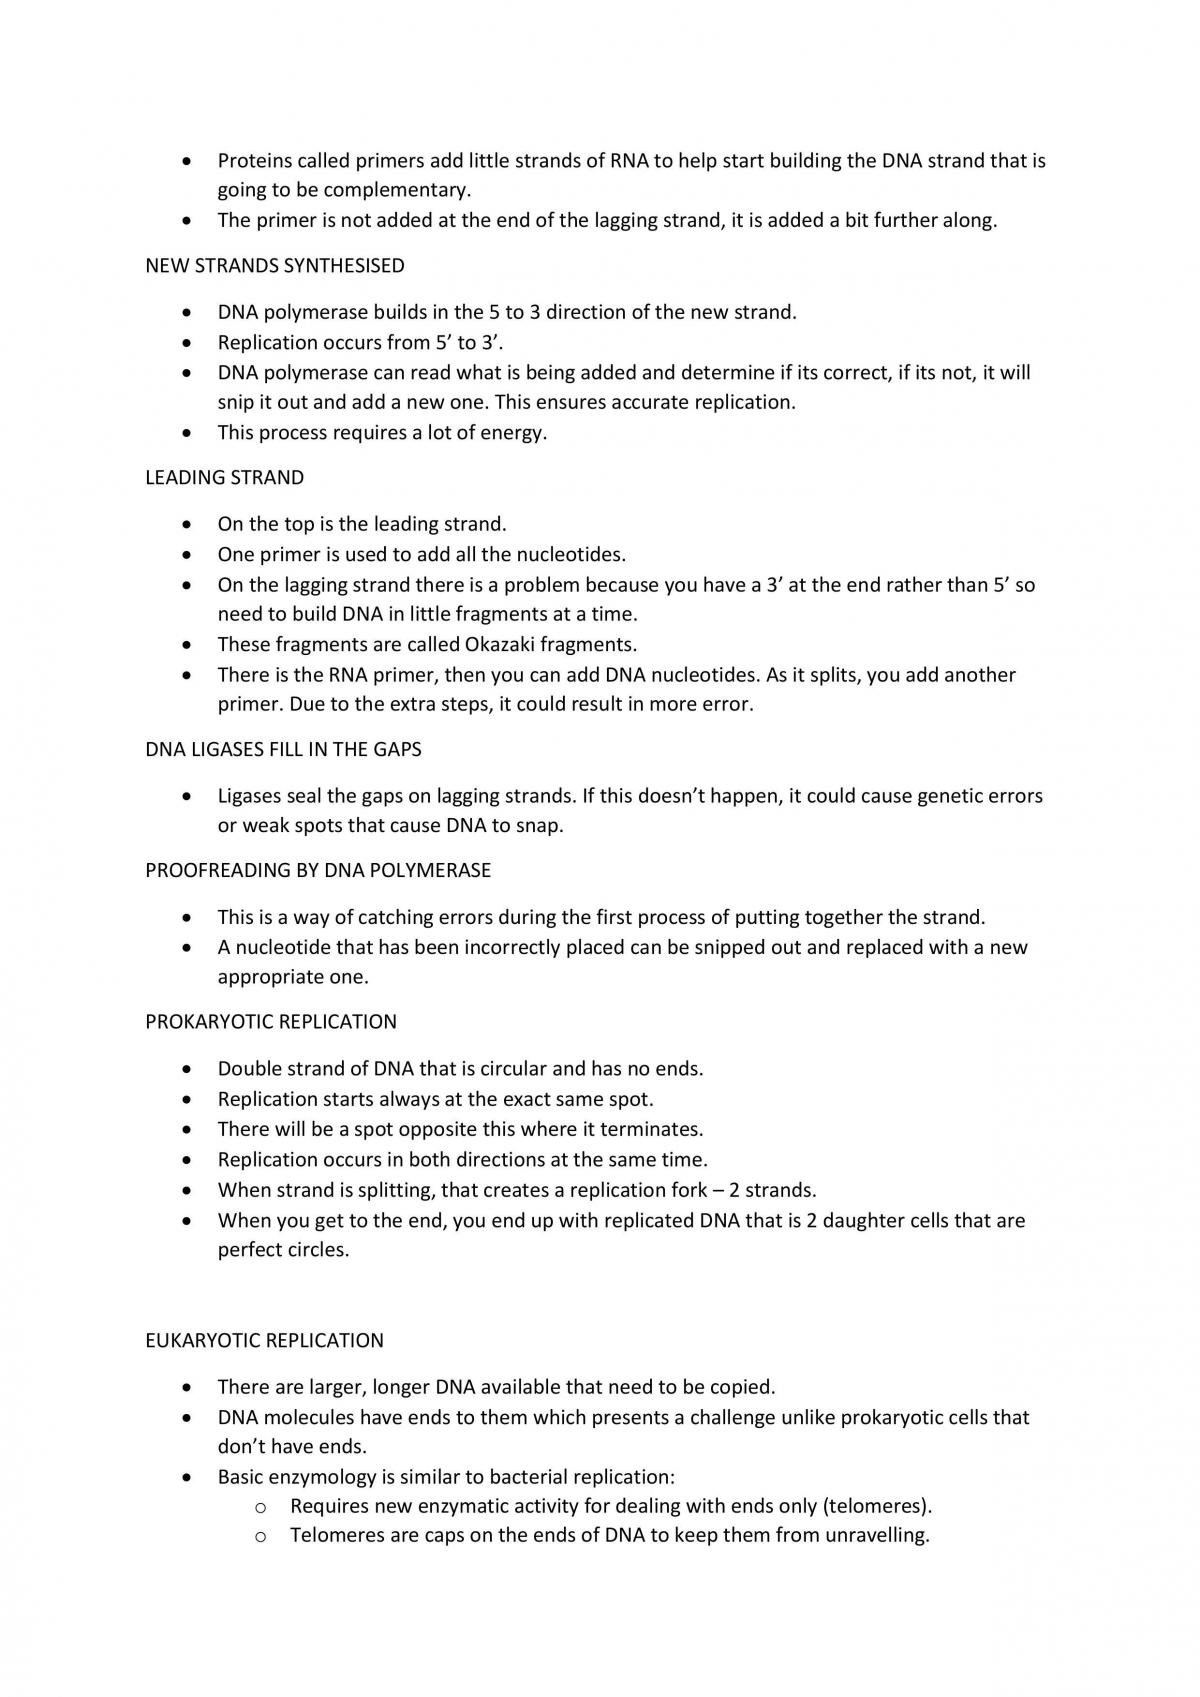 300816 Study Notes - Page 30